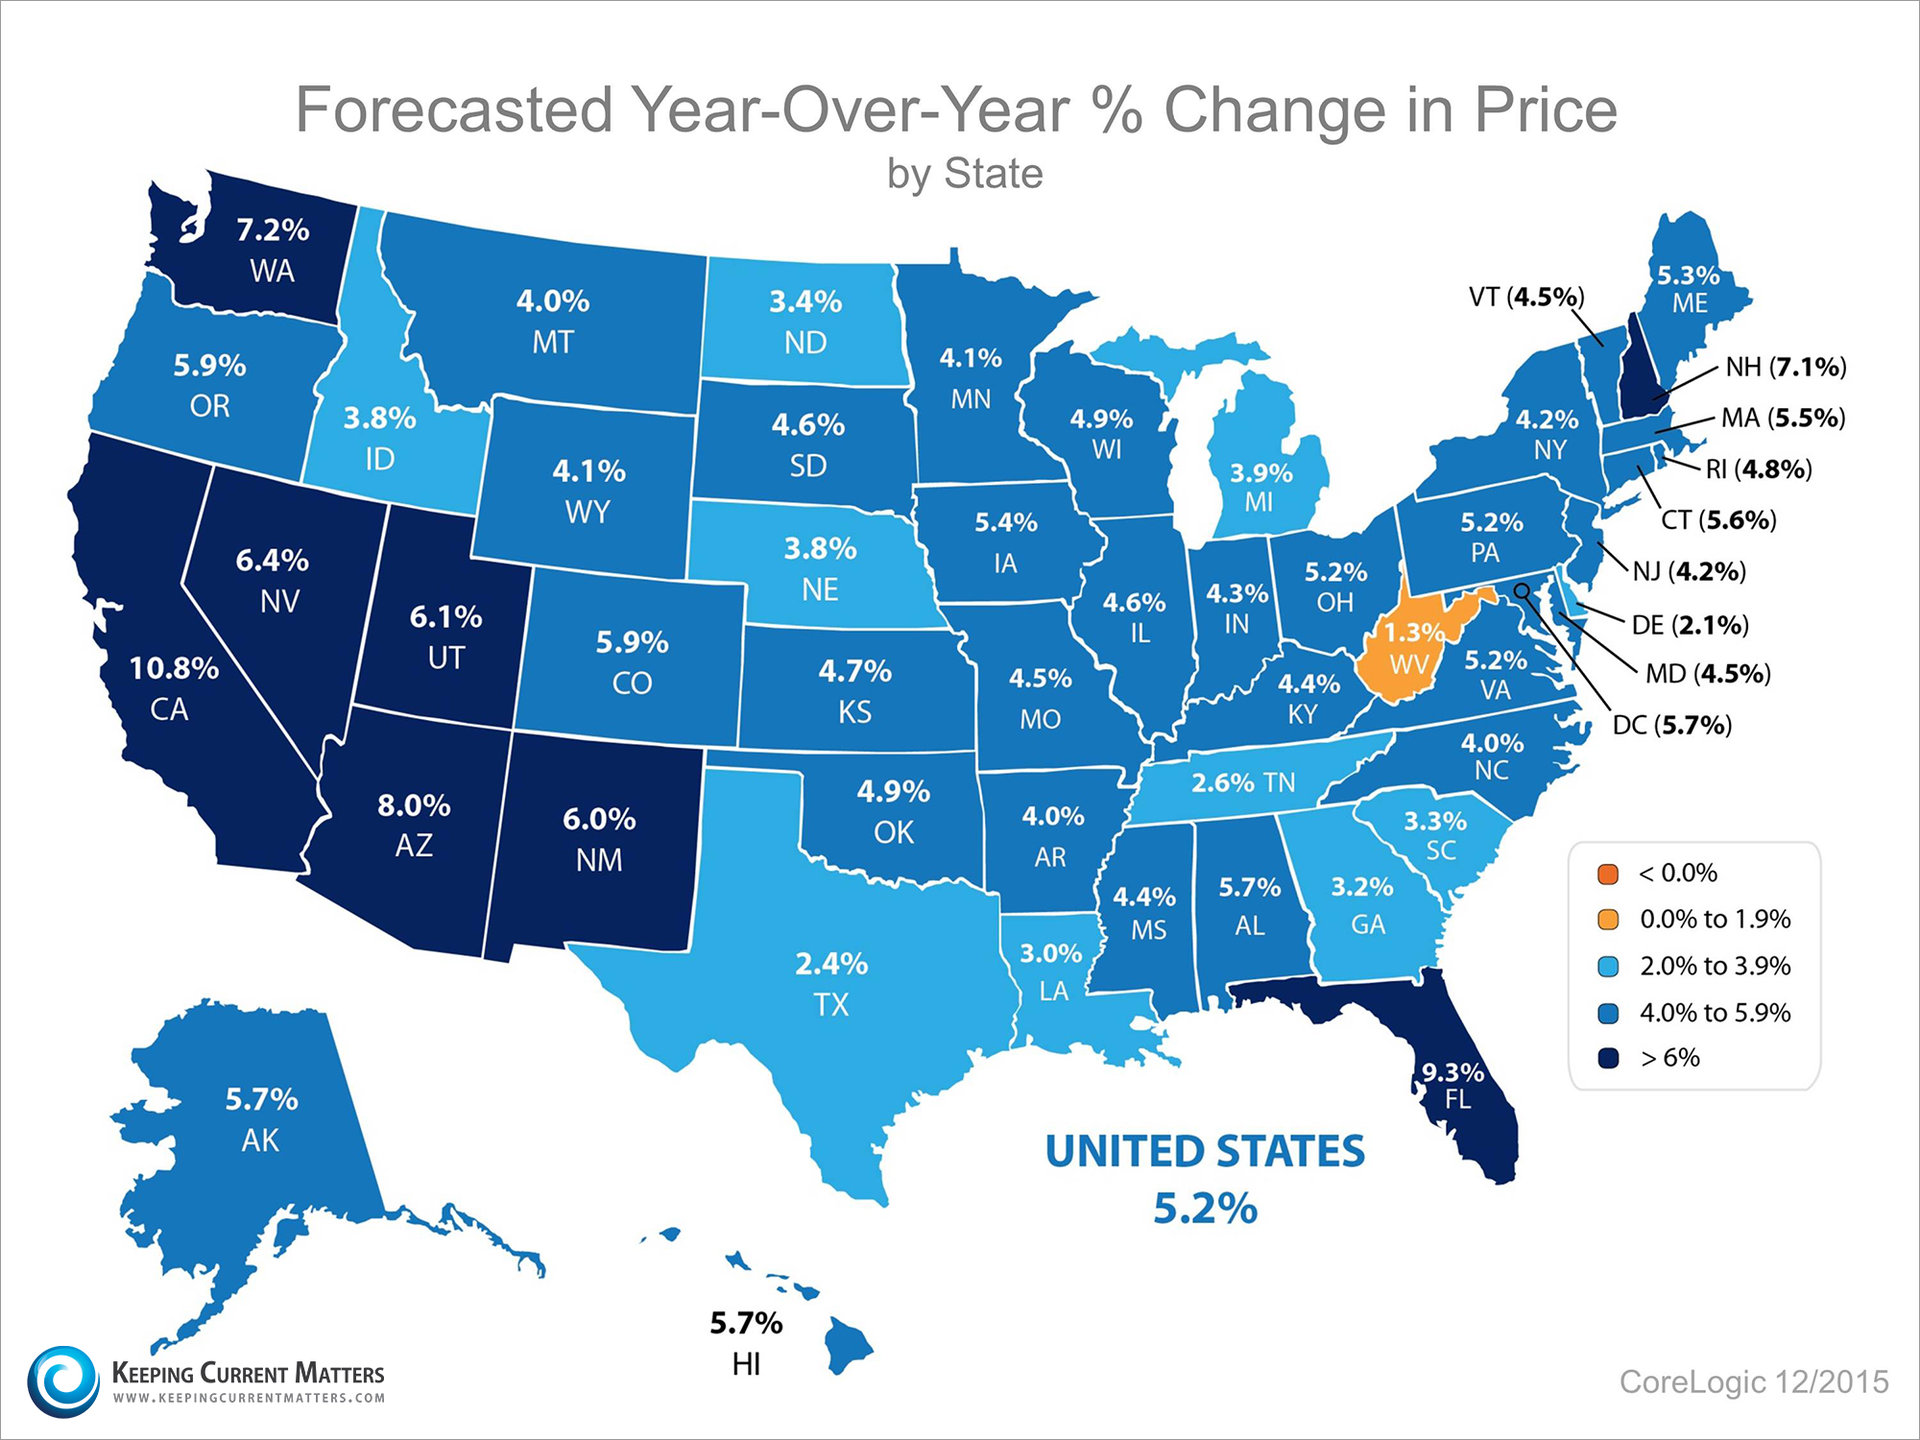 Pricing Forecast | Keeping Current Matters